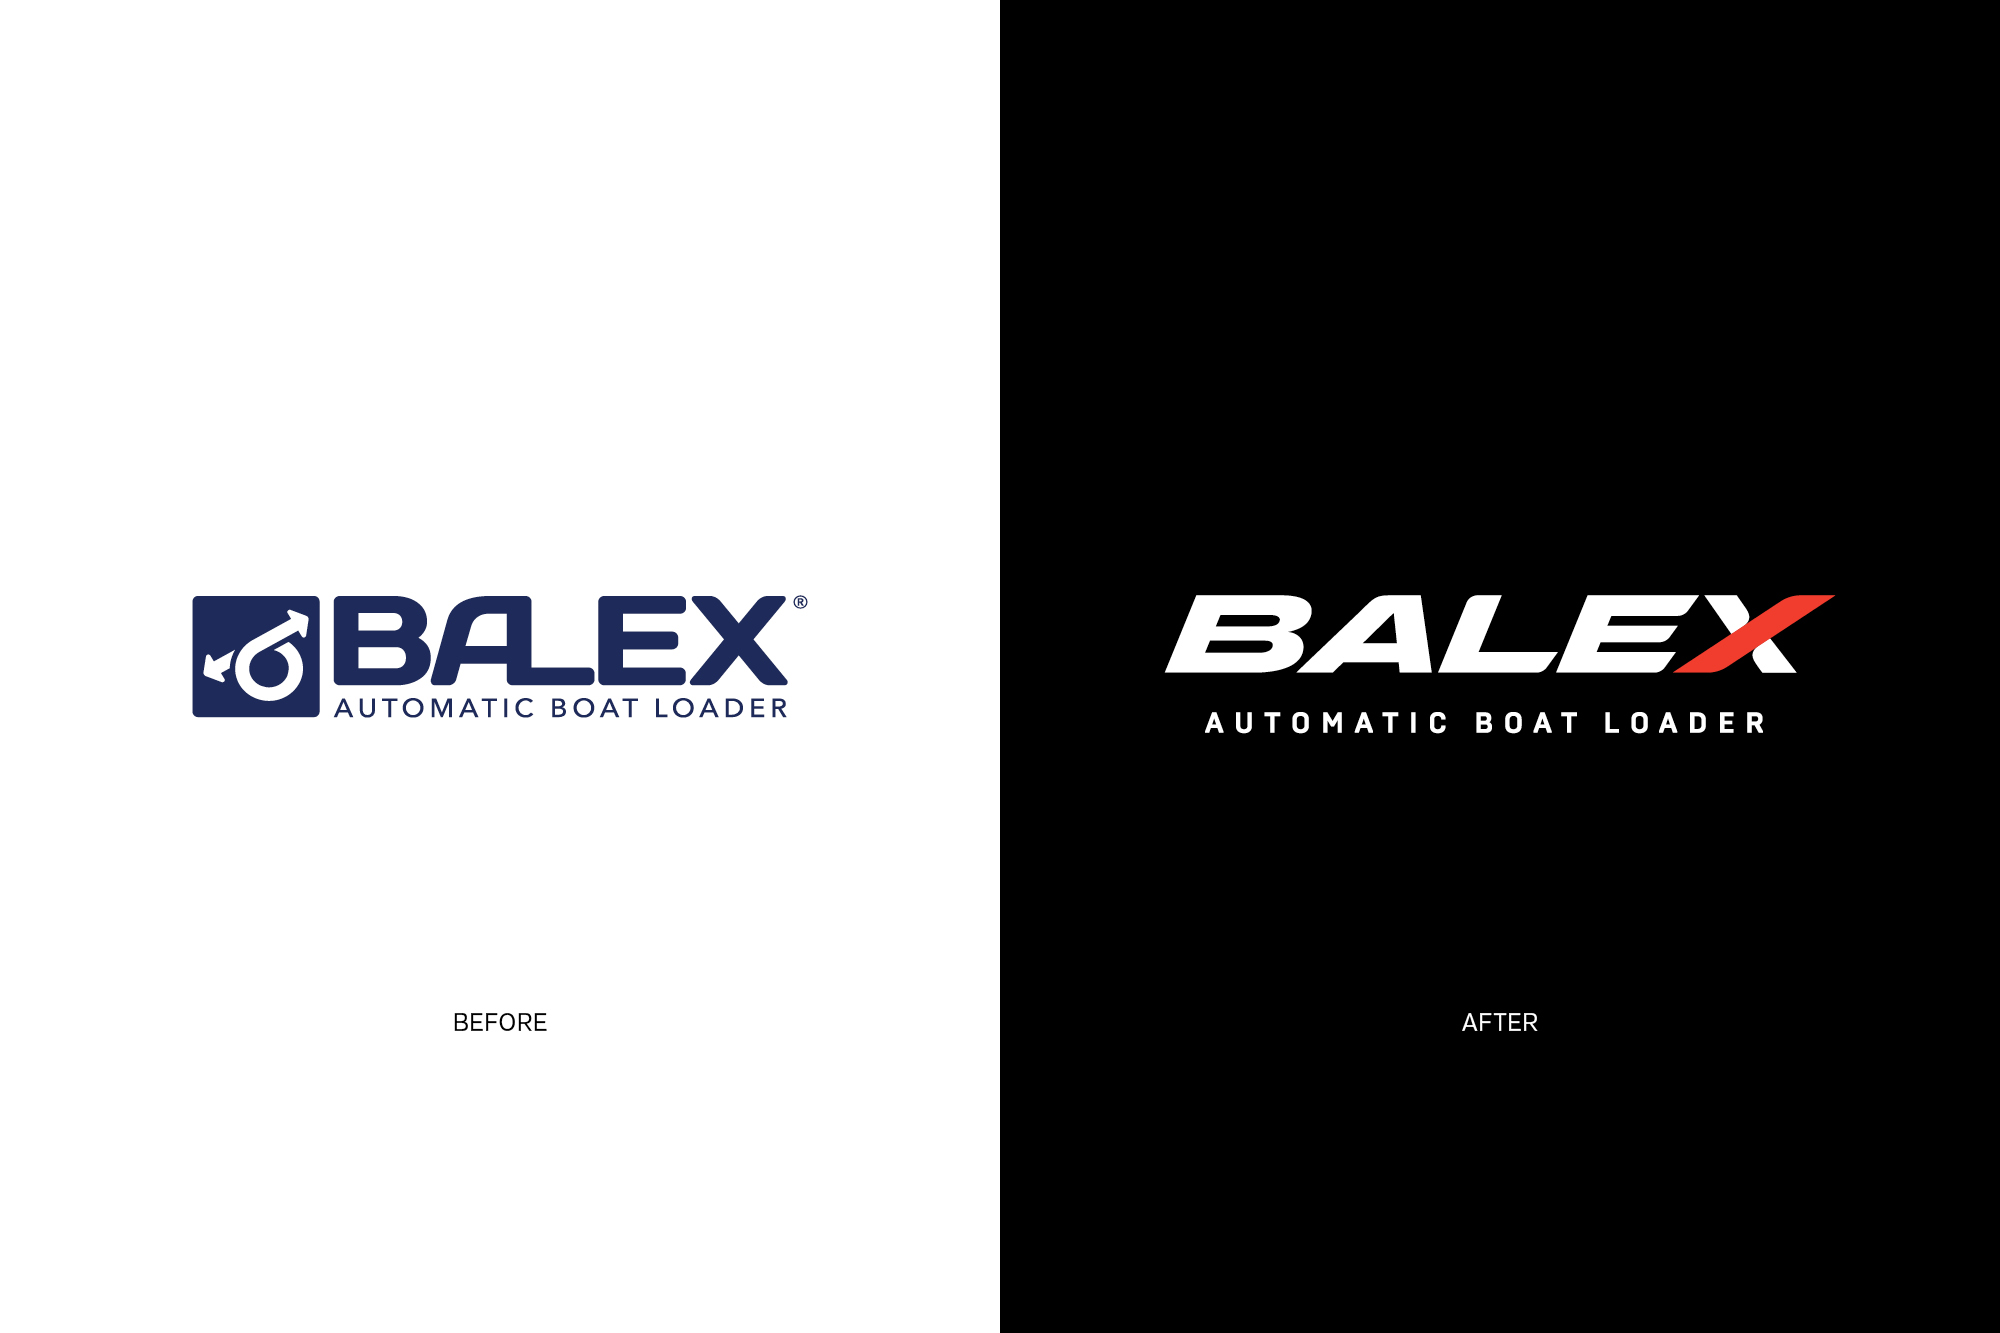 Balex Before vs After Brand Identity Onfire Design